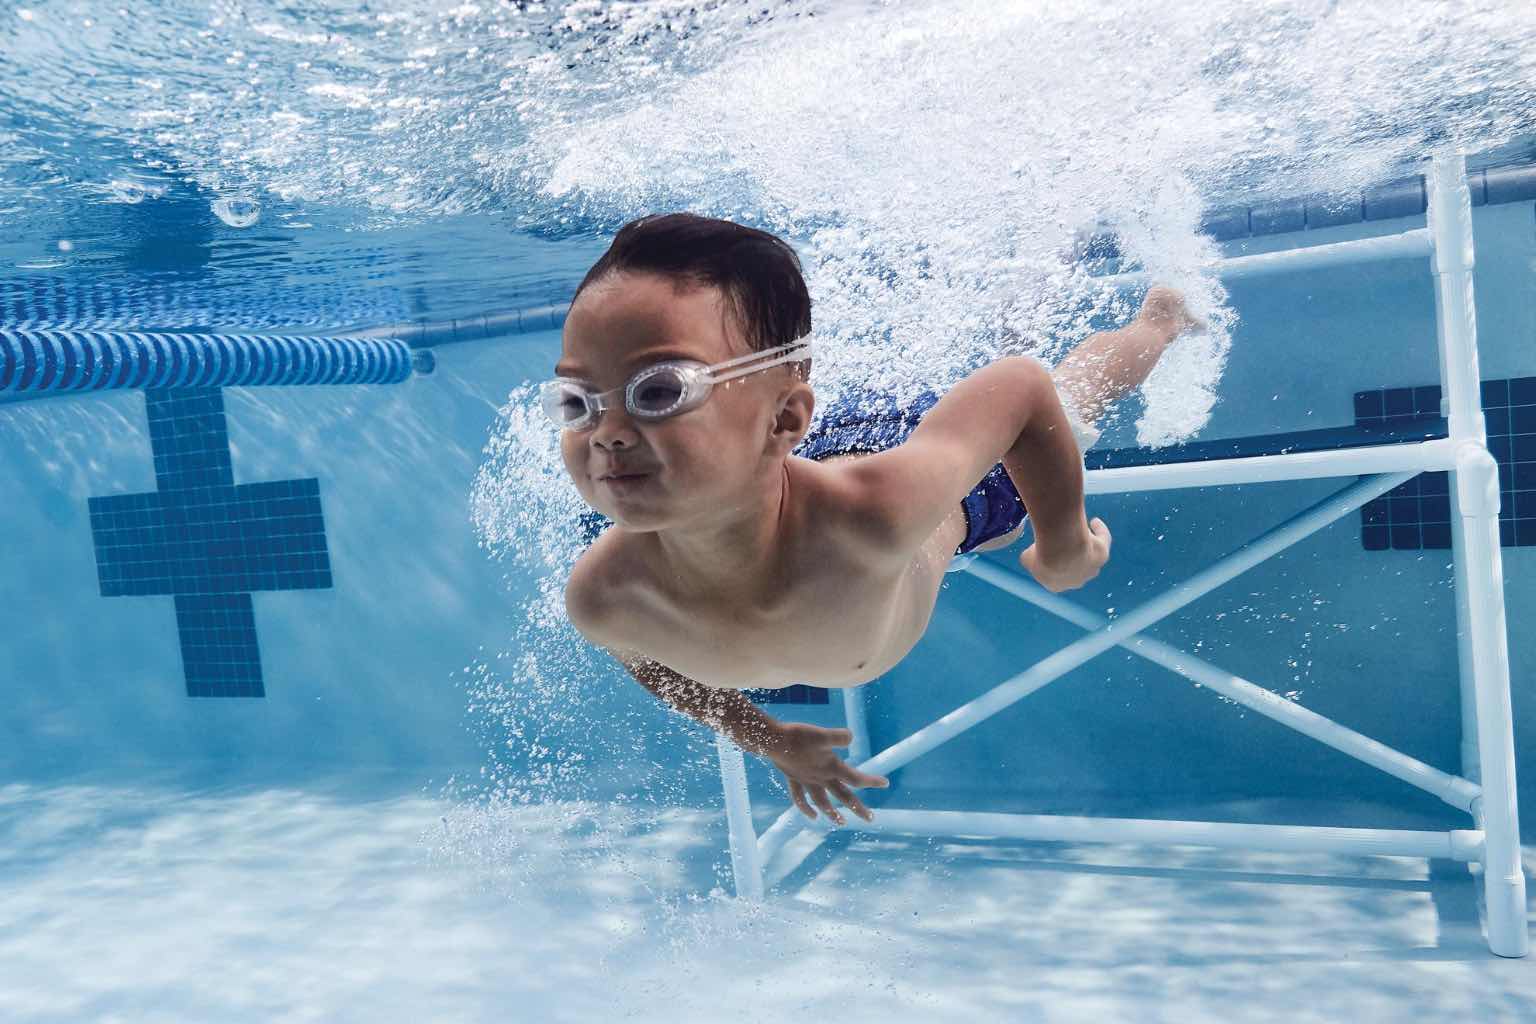 Young boy wearing goggles holding his breath and swimming underwater